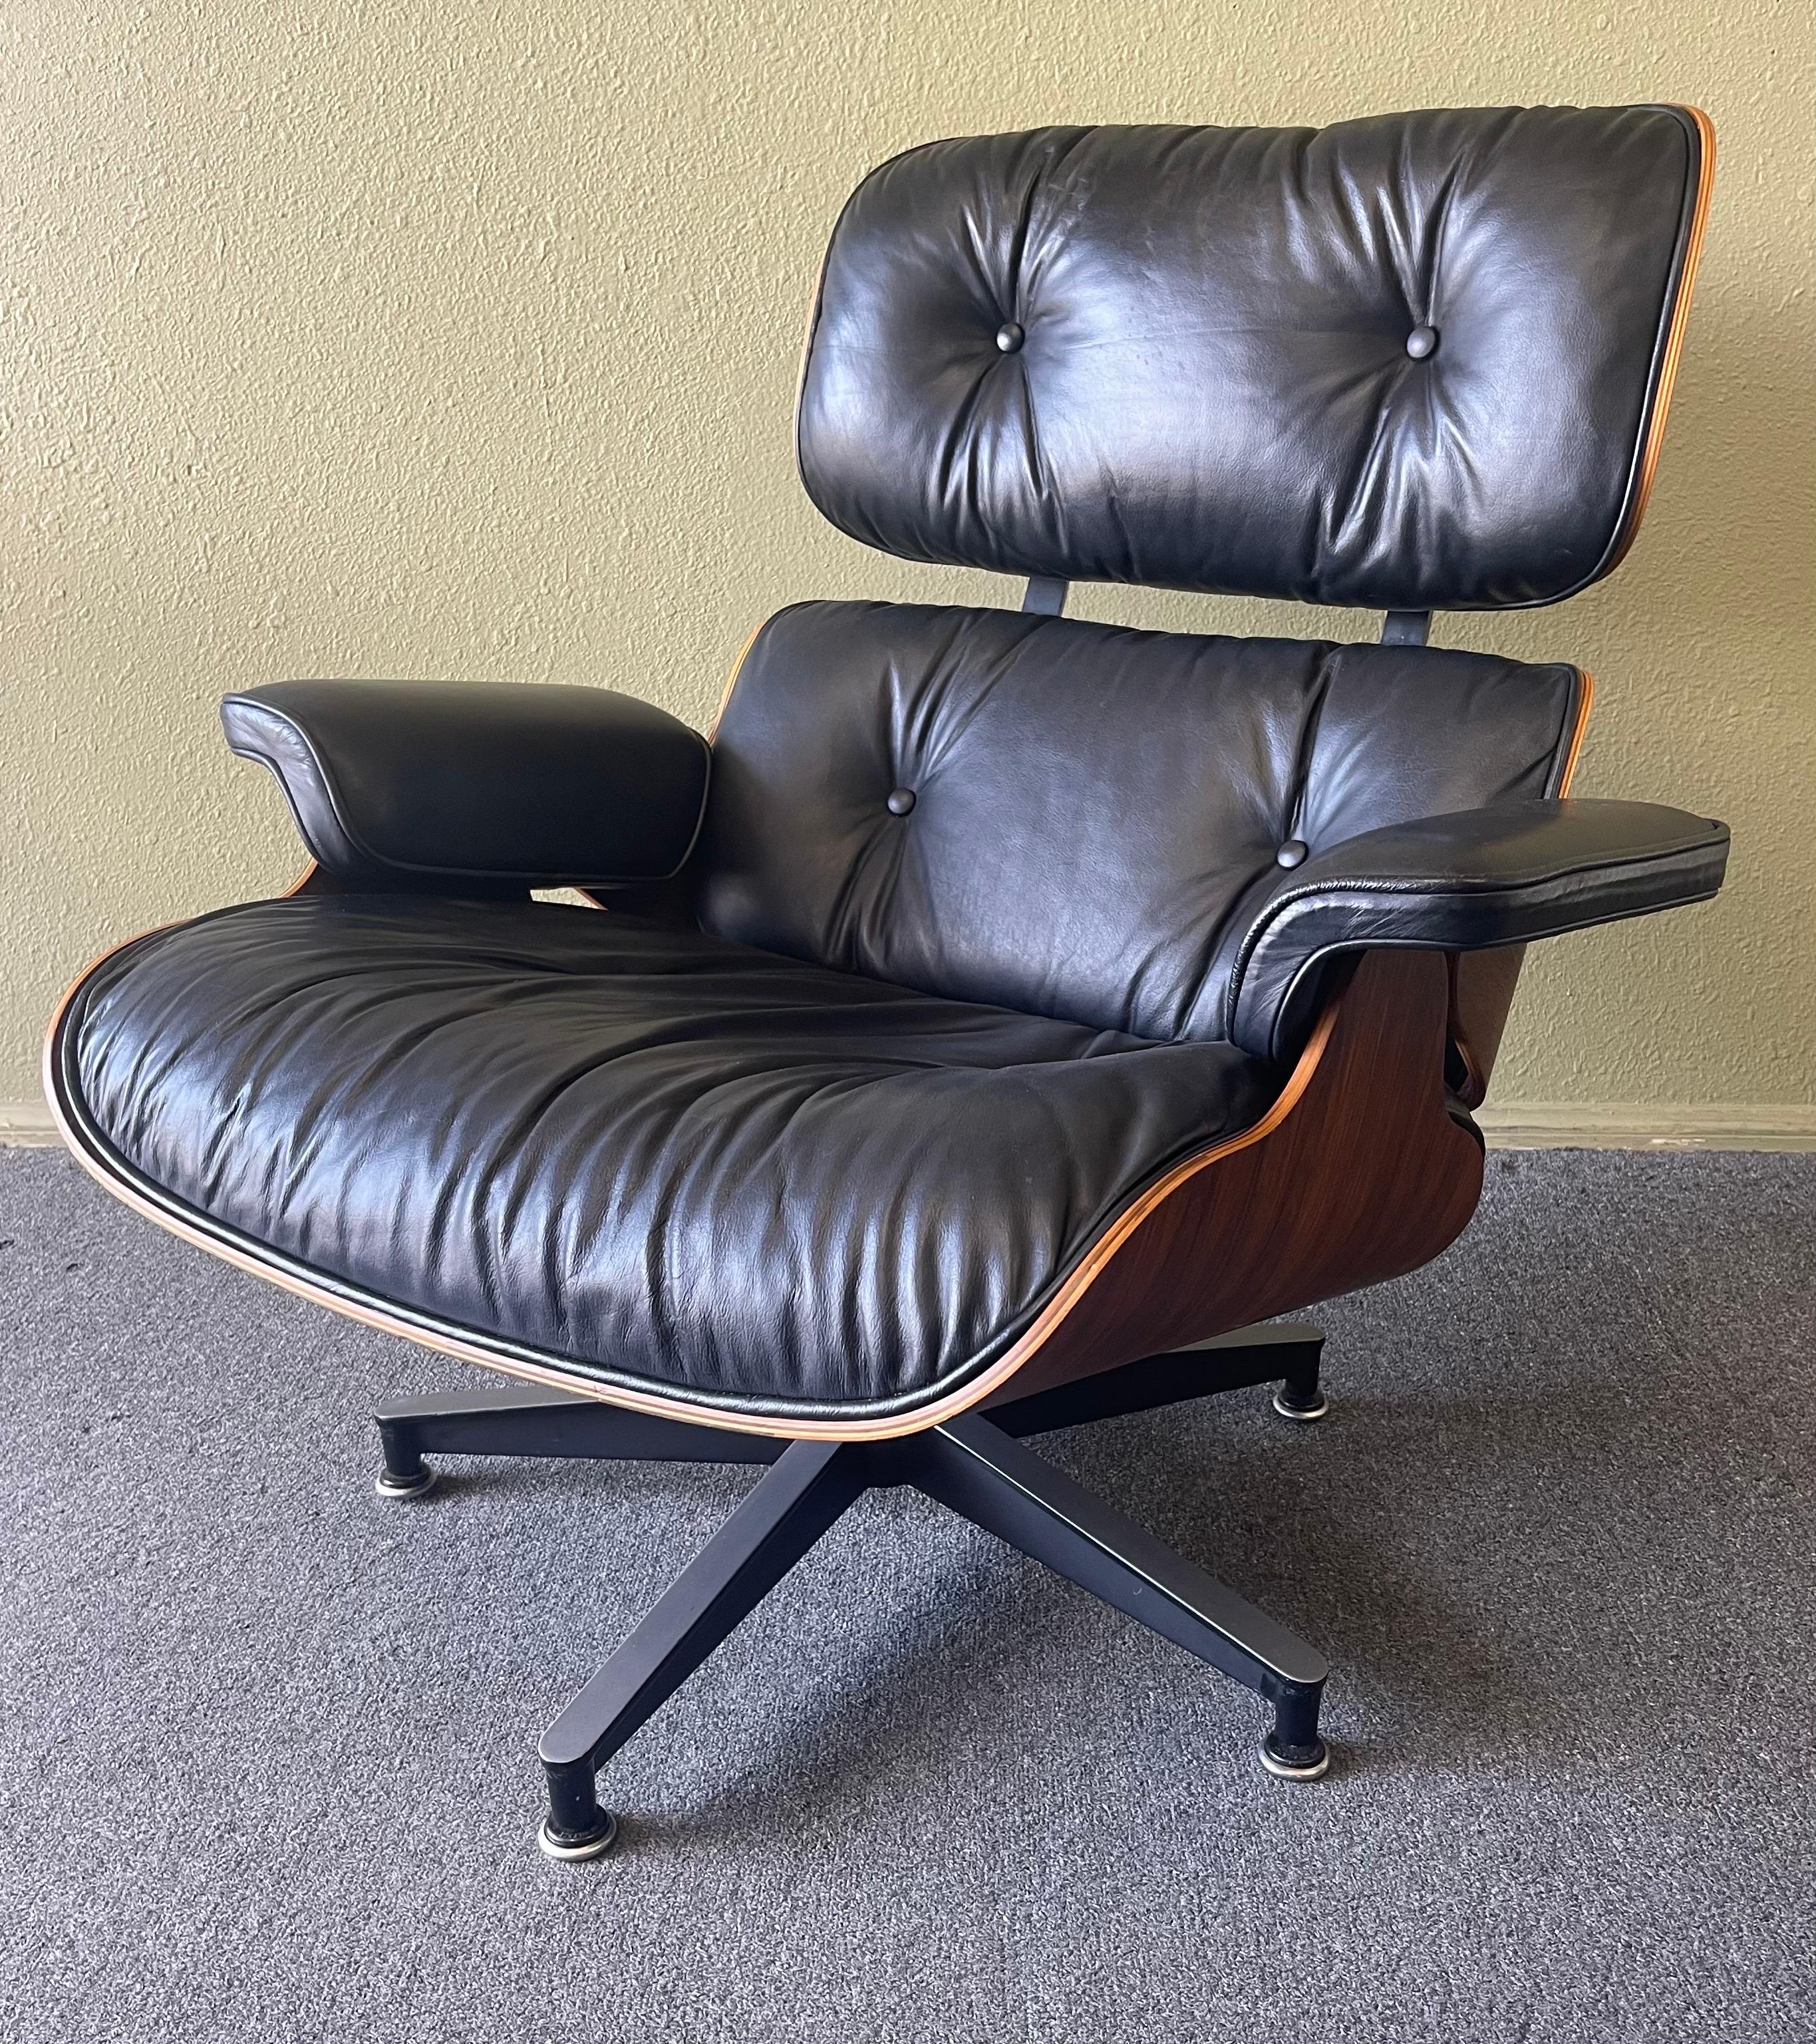 20th Century Iconic Herman Miller Eames Rosewood Lounge Chair and Ottoman, Model 670 & 671